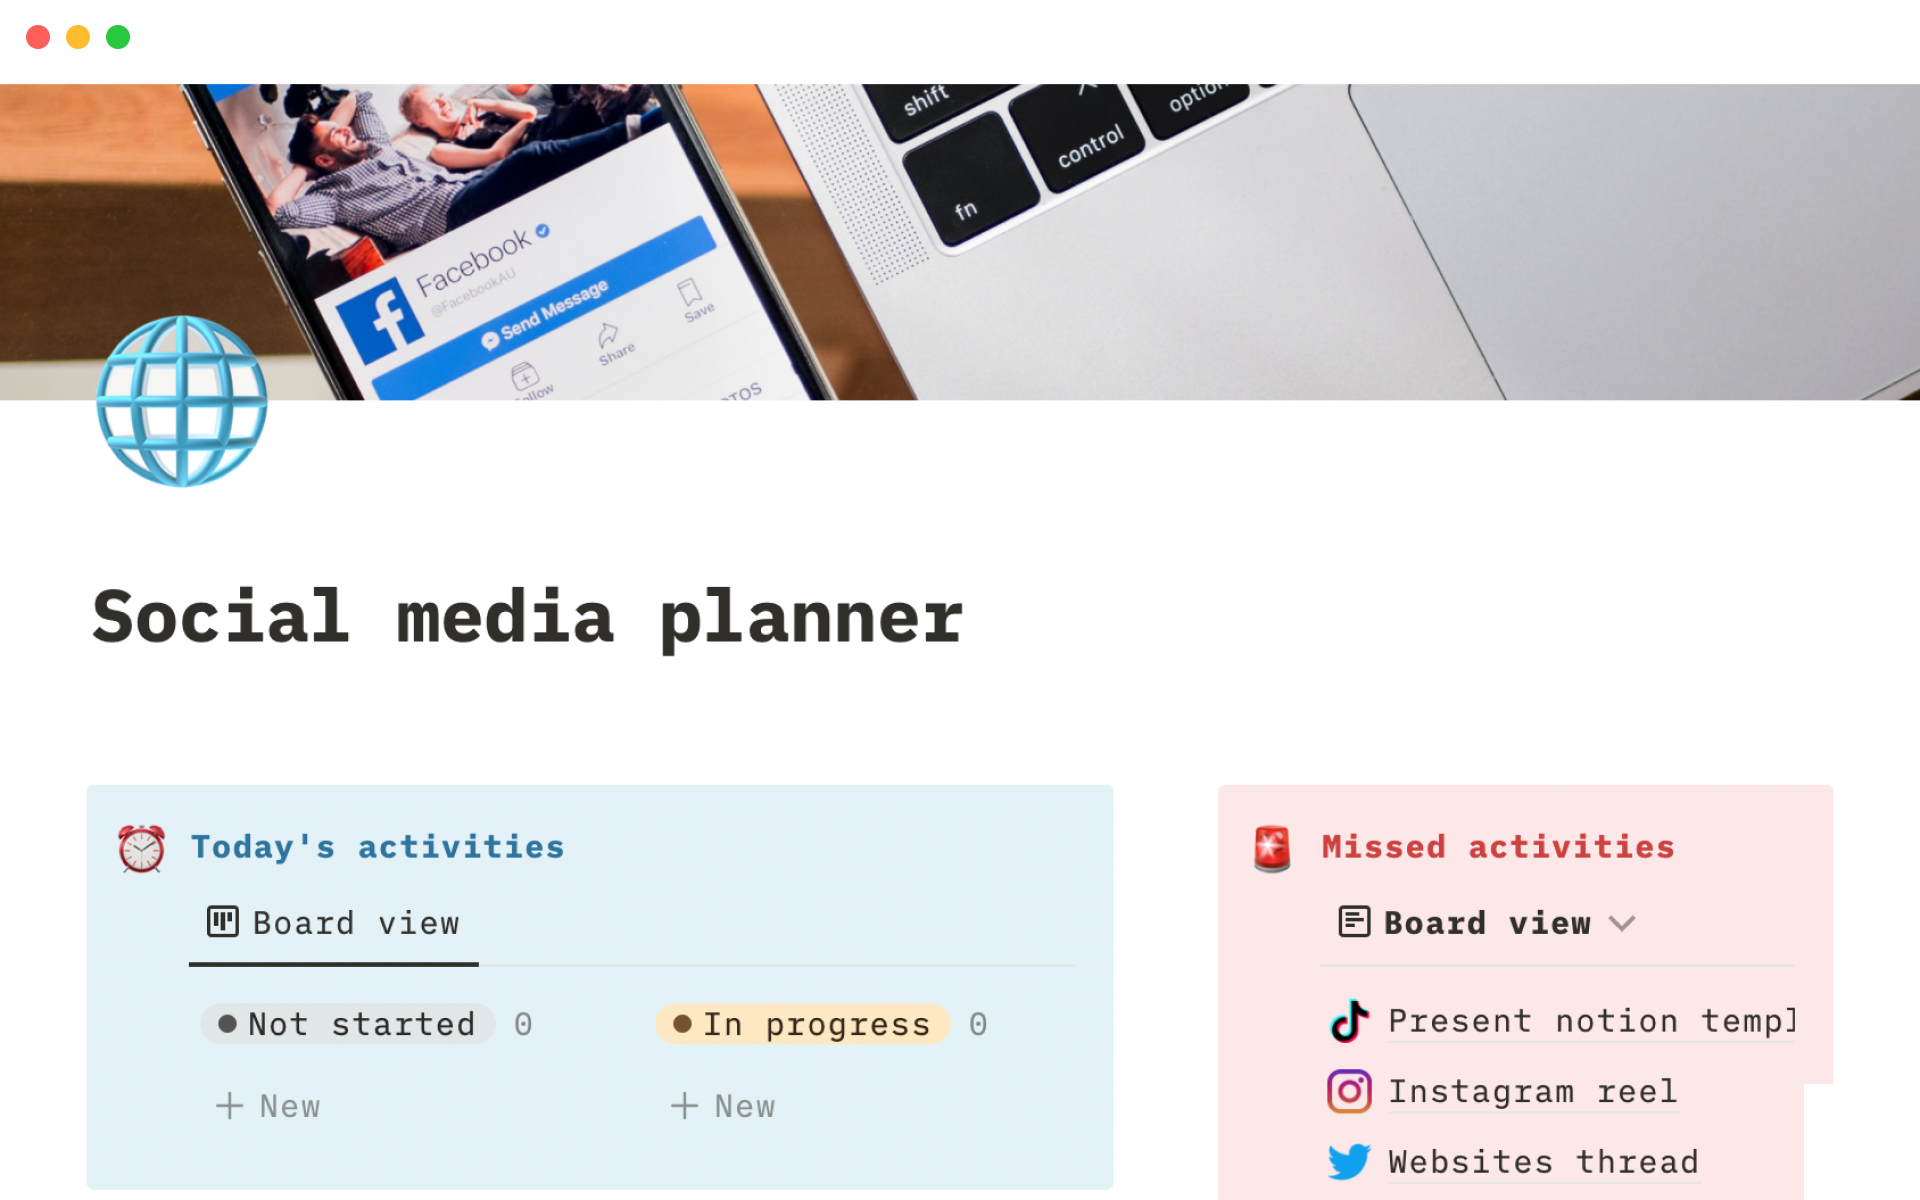 This template helps you schedule your digital content on social media platforms.